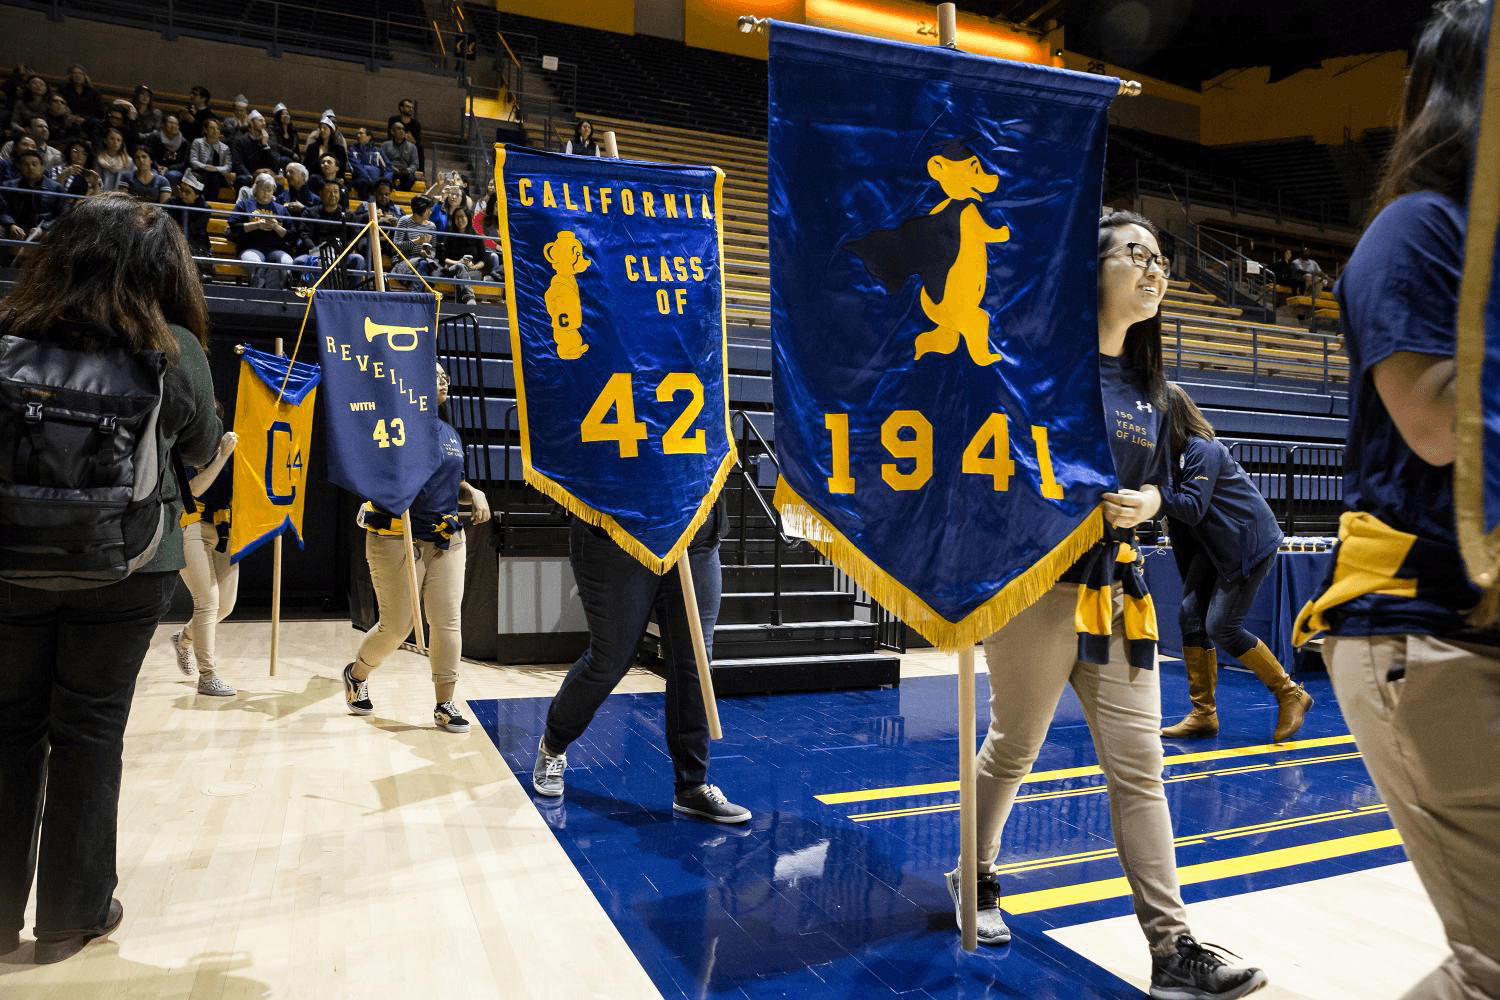 class of 1941 and 1942 banners